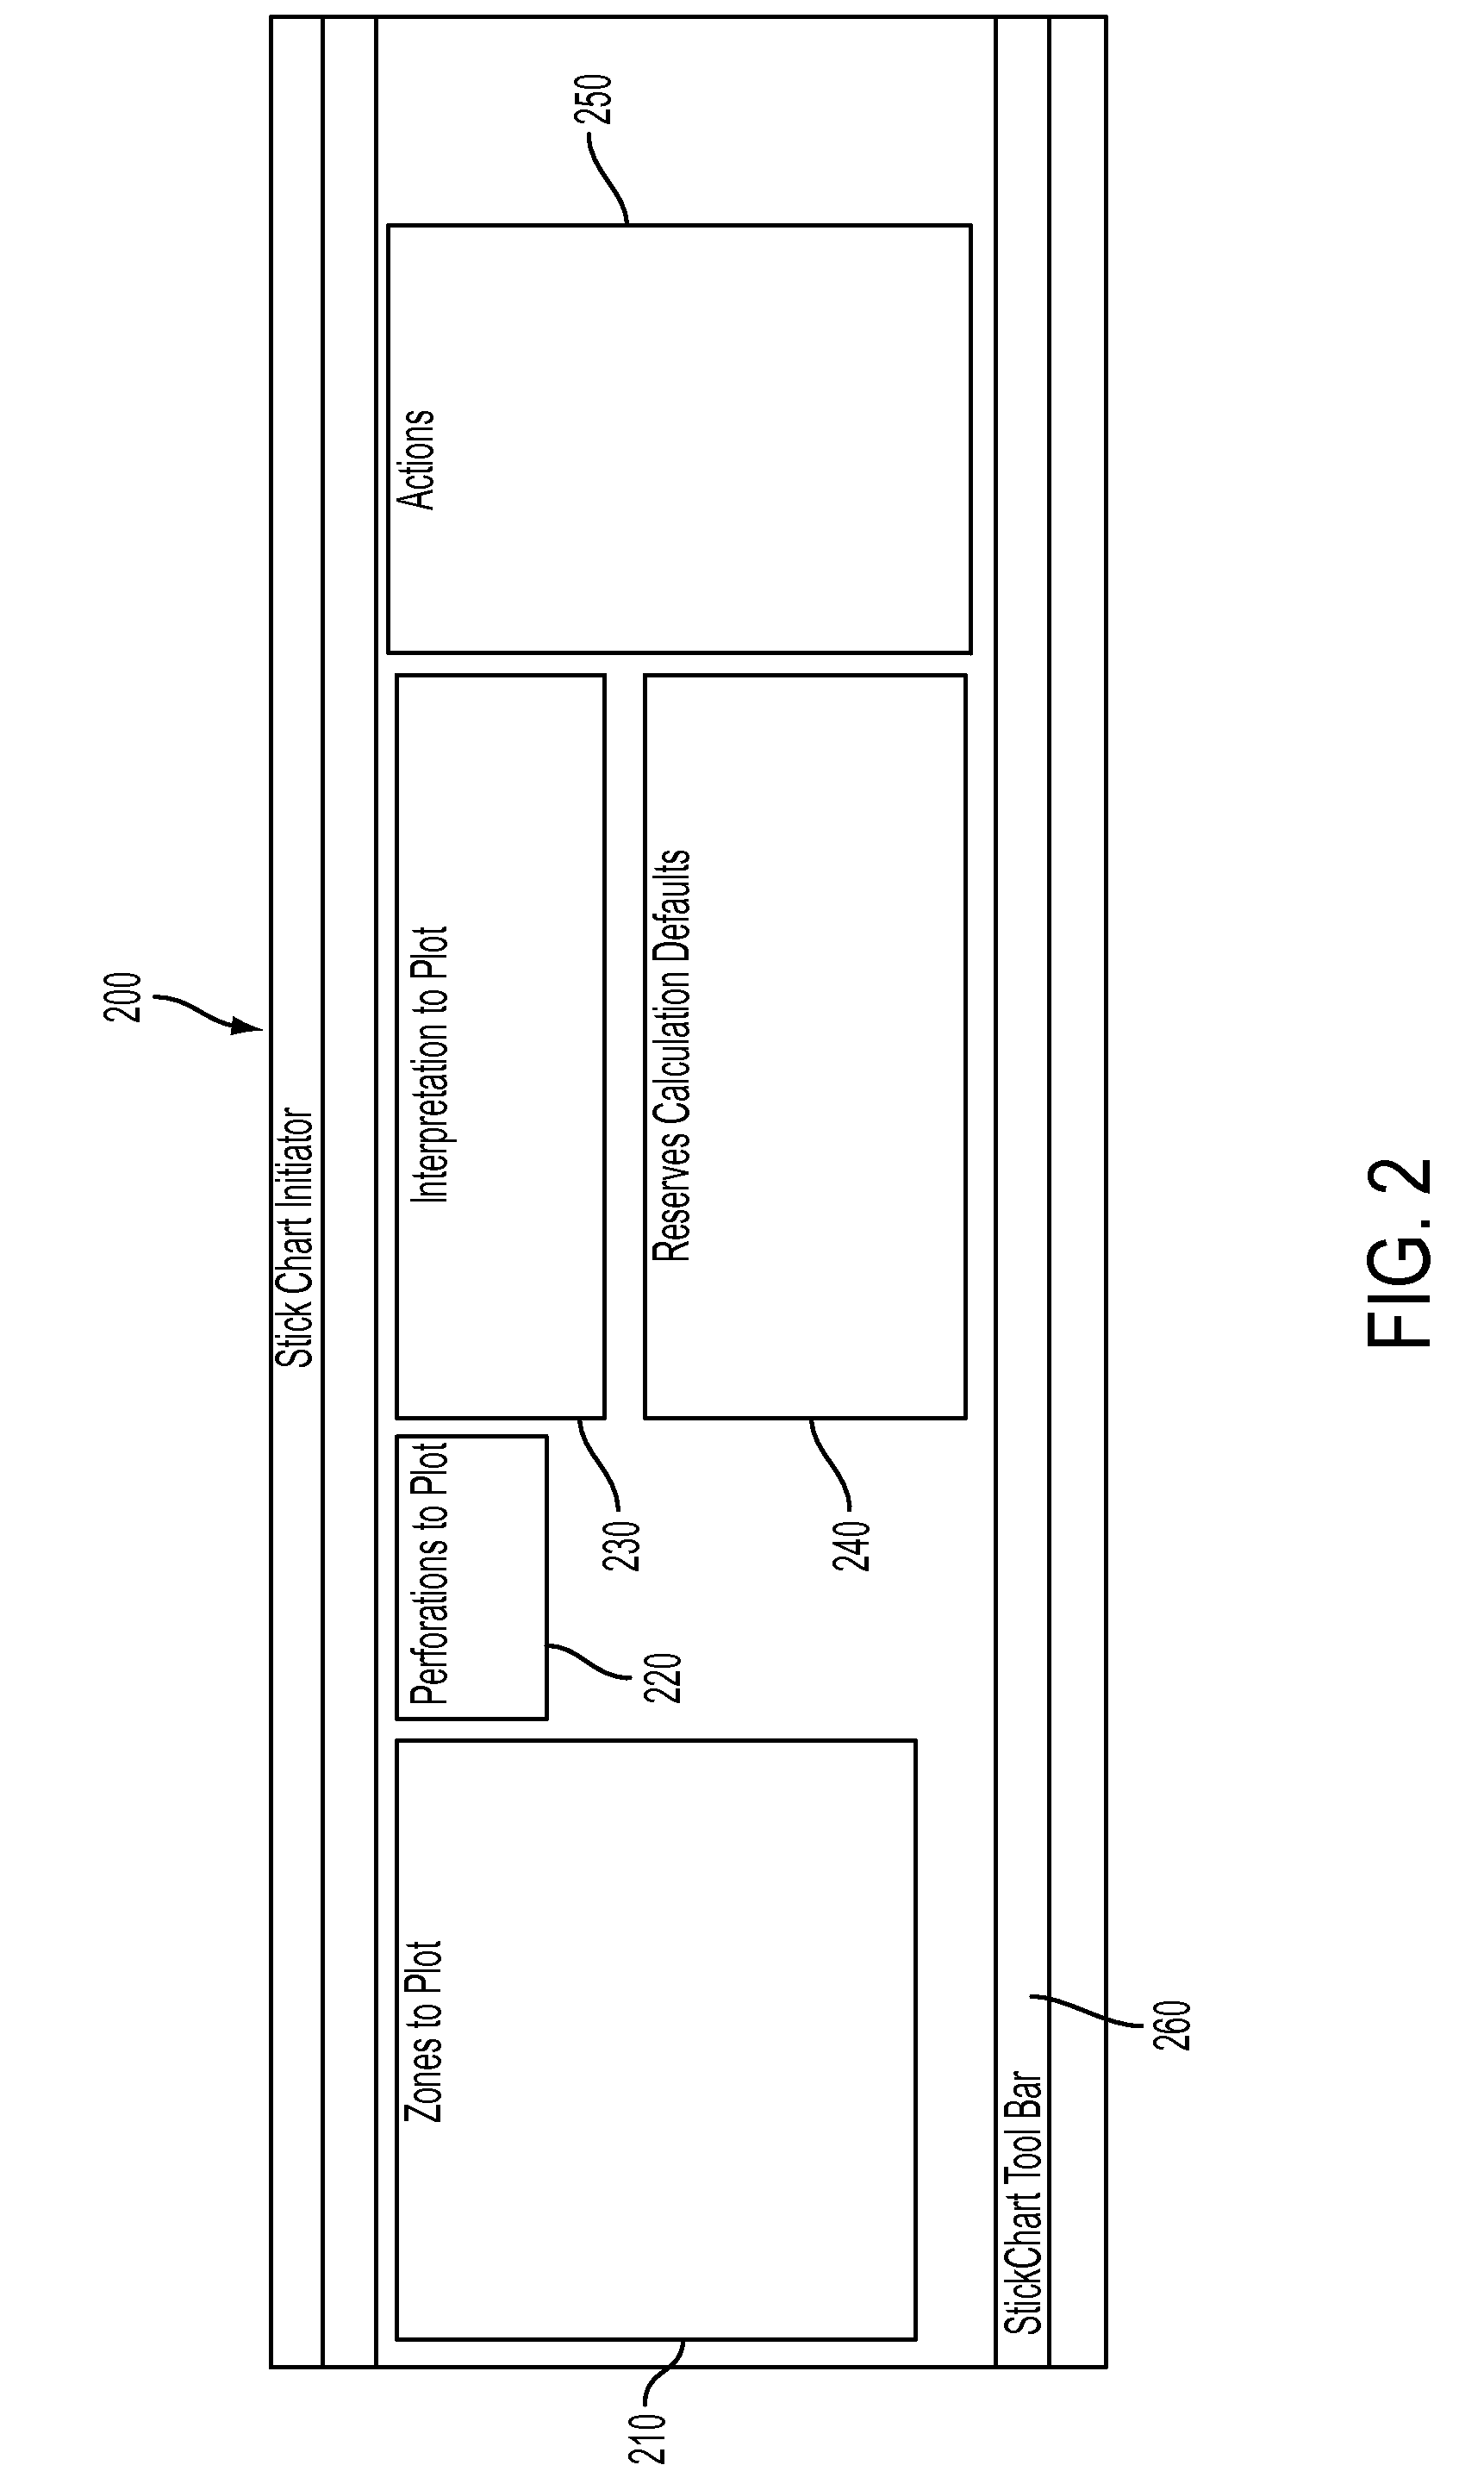 System And Method For Quickly Visualizing Oil And Gas Field Data